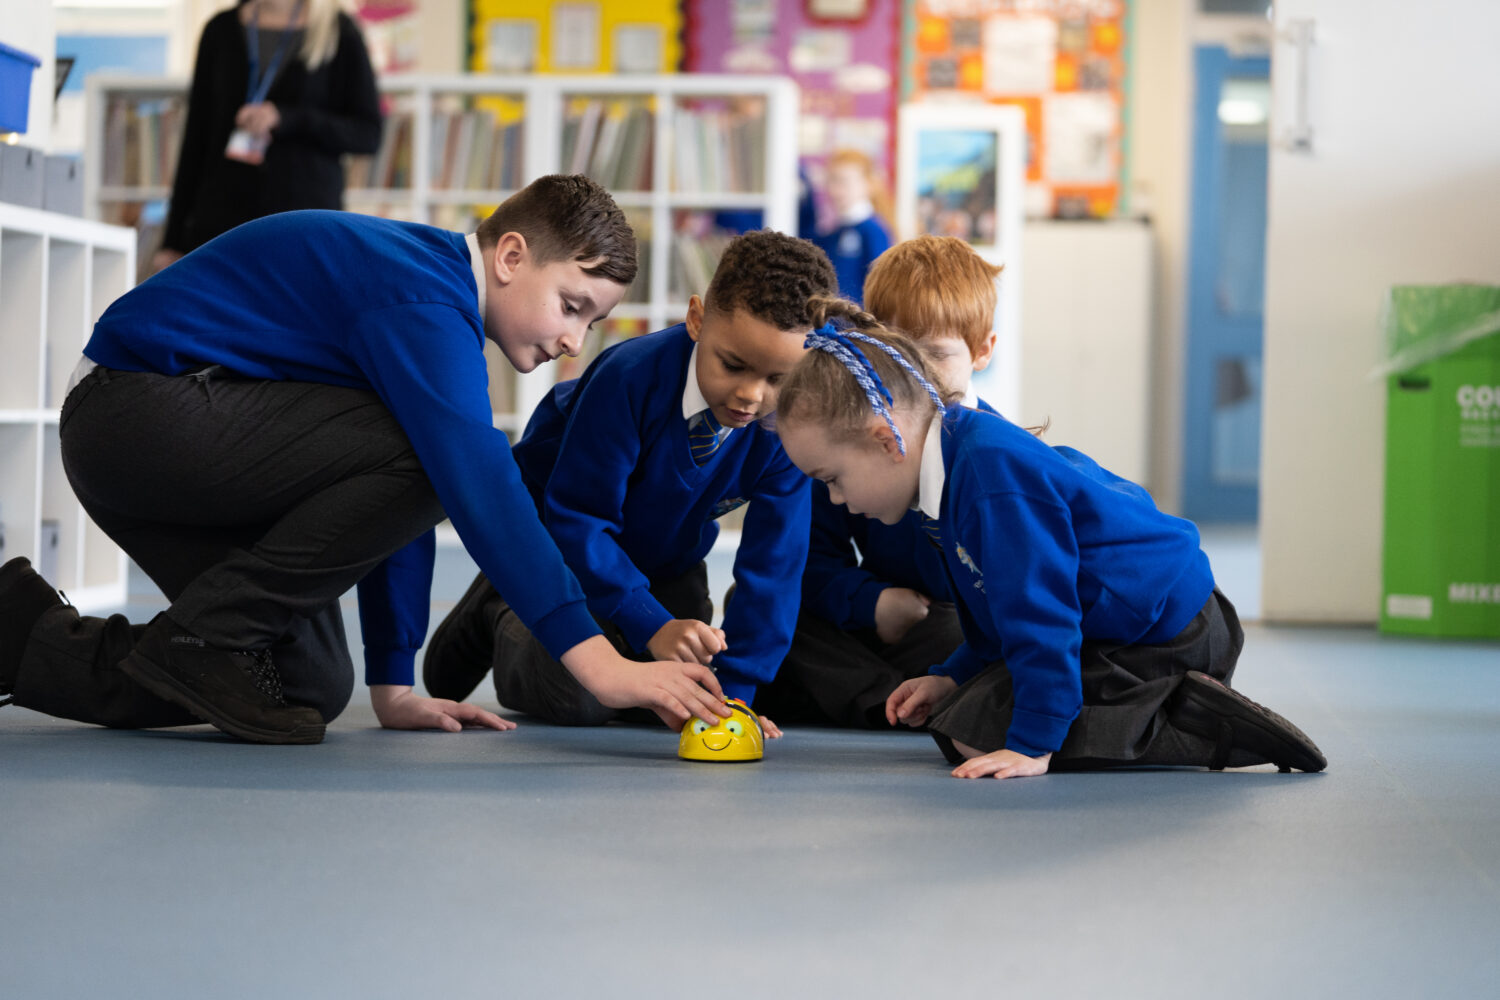 A group of four pupils, male and female, are pictured playing together on the floor with a Bee-shaped toy.